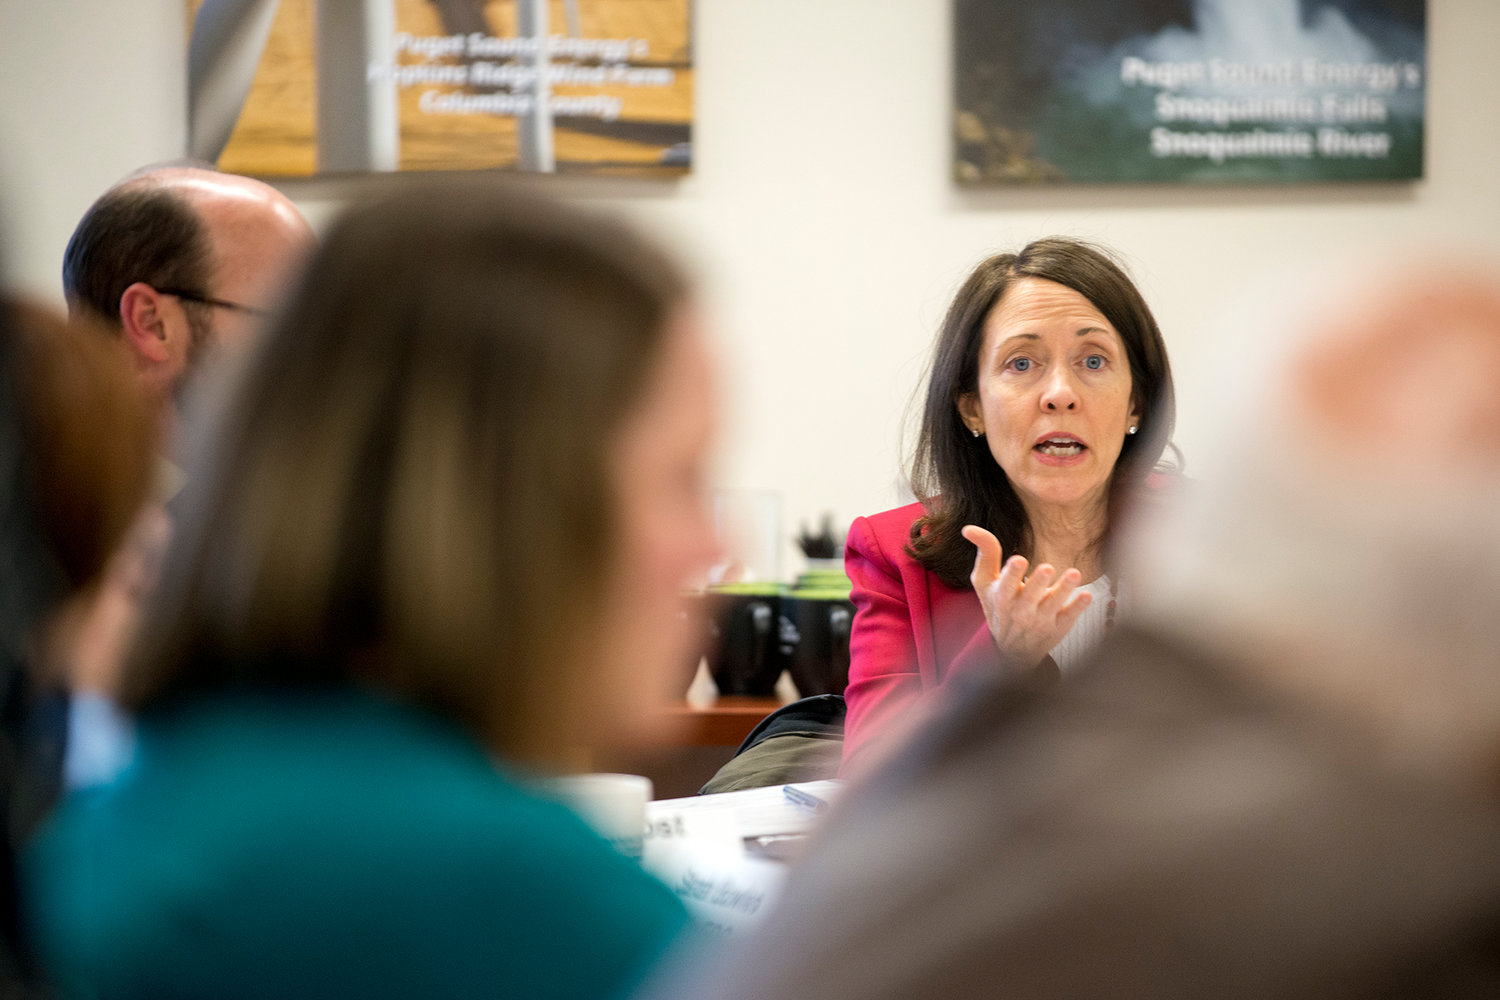 U.S. Sen. Maria Cantwell, D-Washington, asks questions after a presentation on various clean energy job training grants at Centralia College’s Center of Excellence for Clean Energy in 2015.